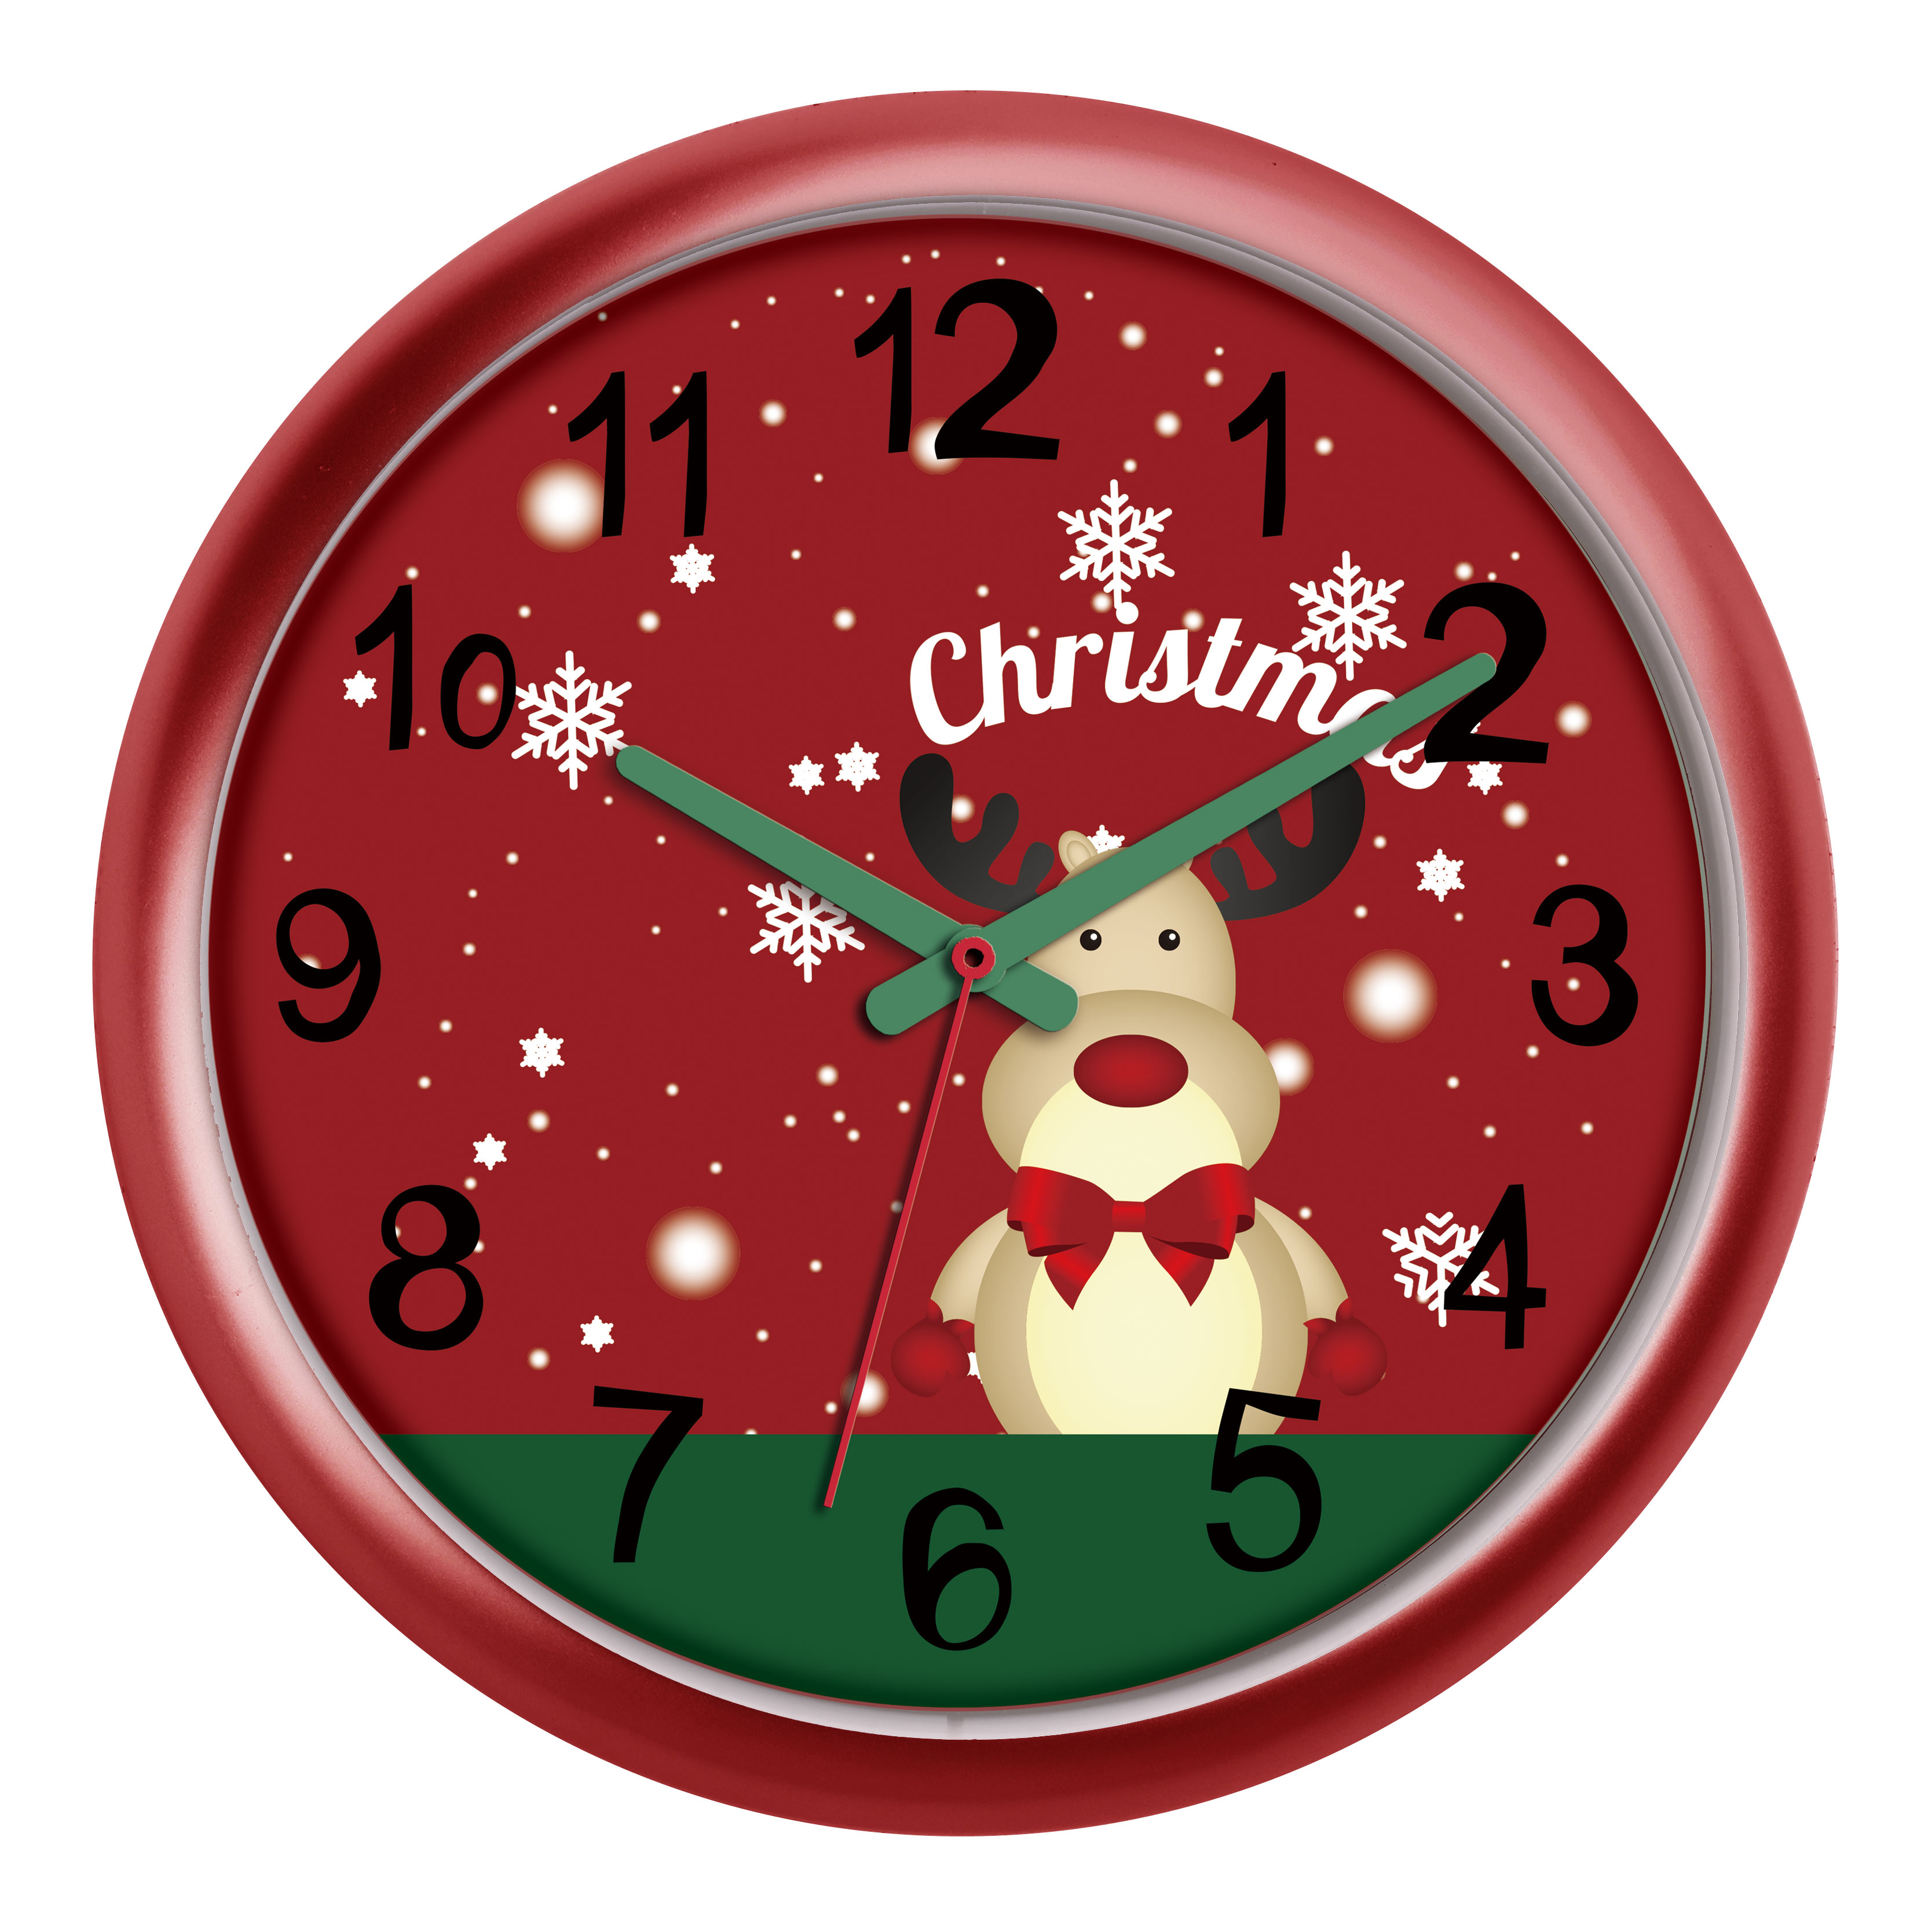 10 Inch Musical Christmas Wall Clock with hourly chime Featured Image